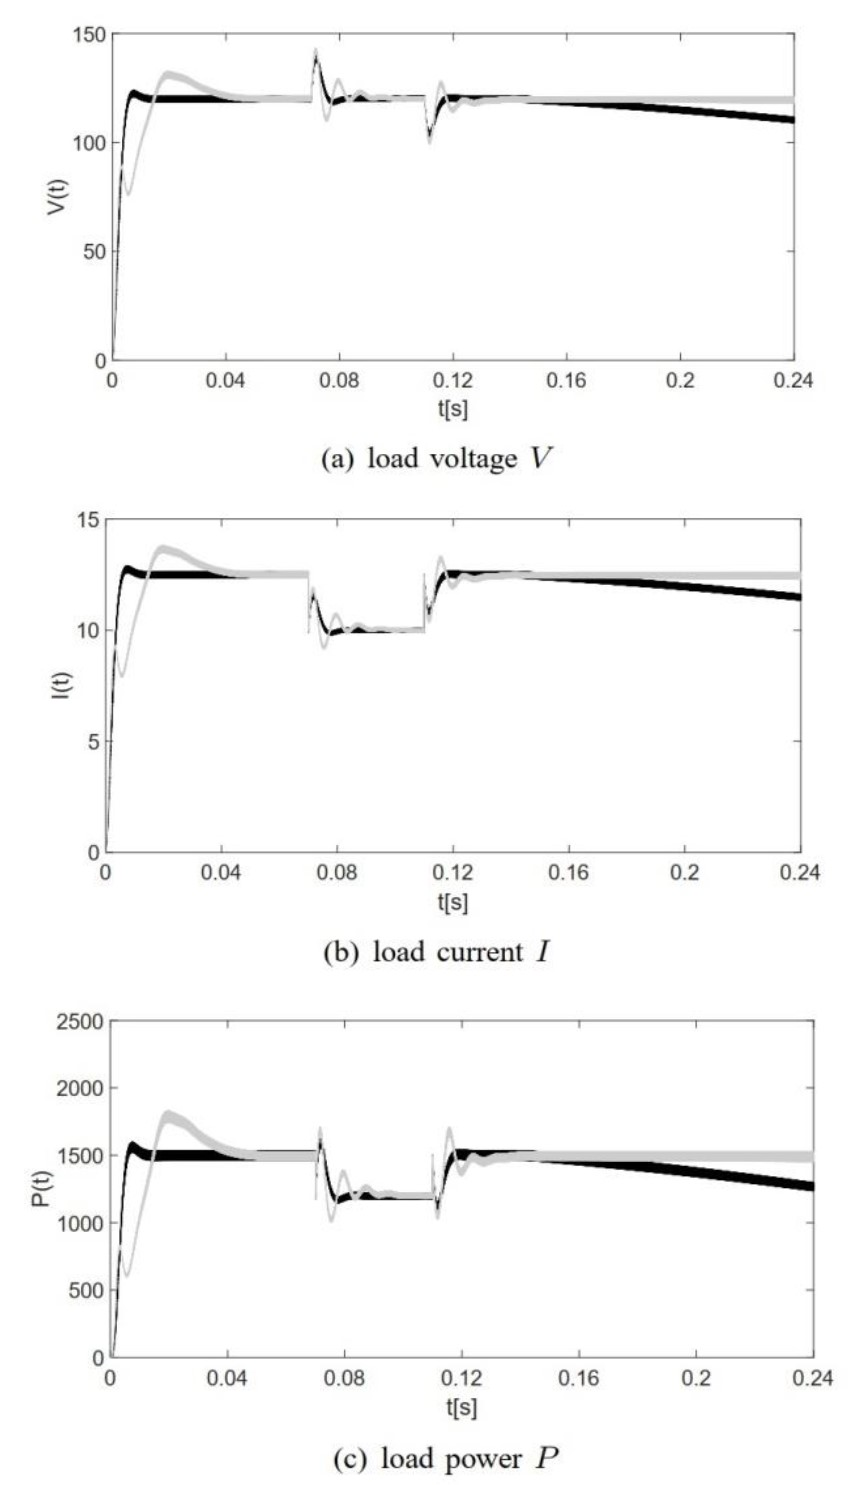 Simulations in PSIM for single generators under disturbances showing open-loop (dark trace) and controlled responses (gray trace)